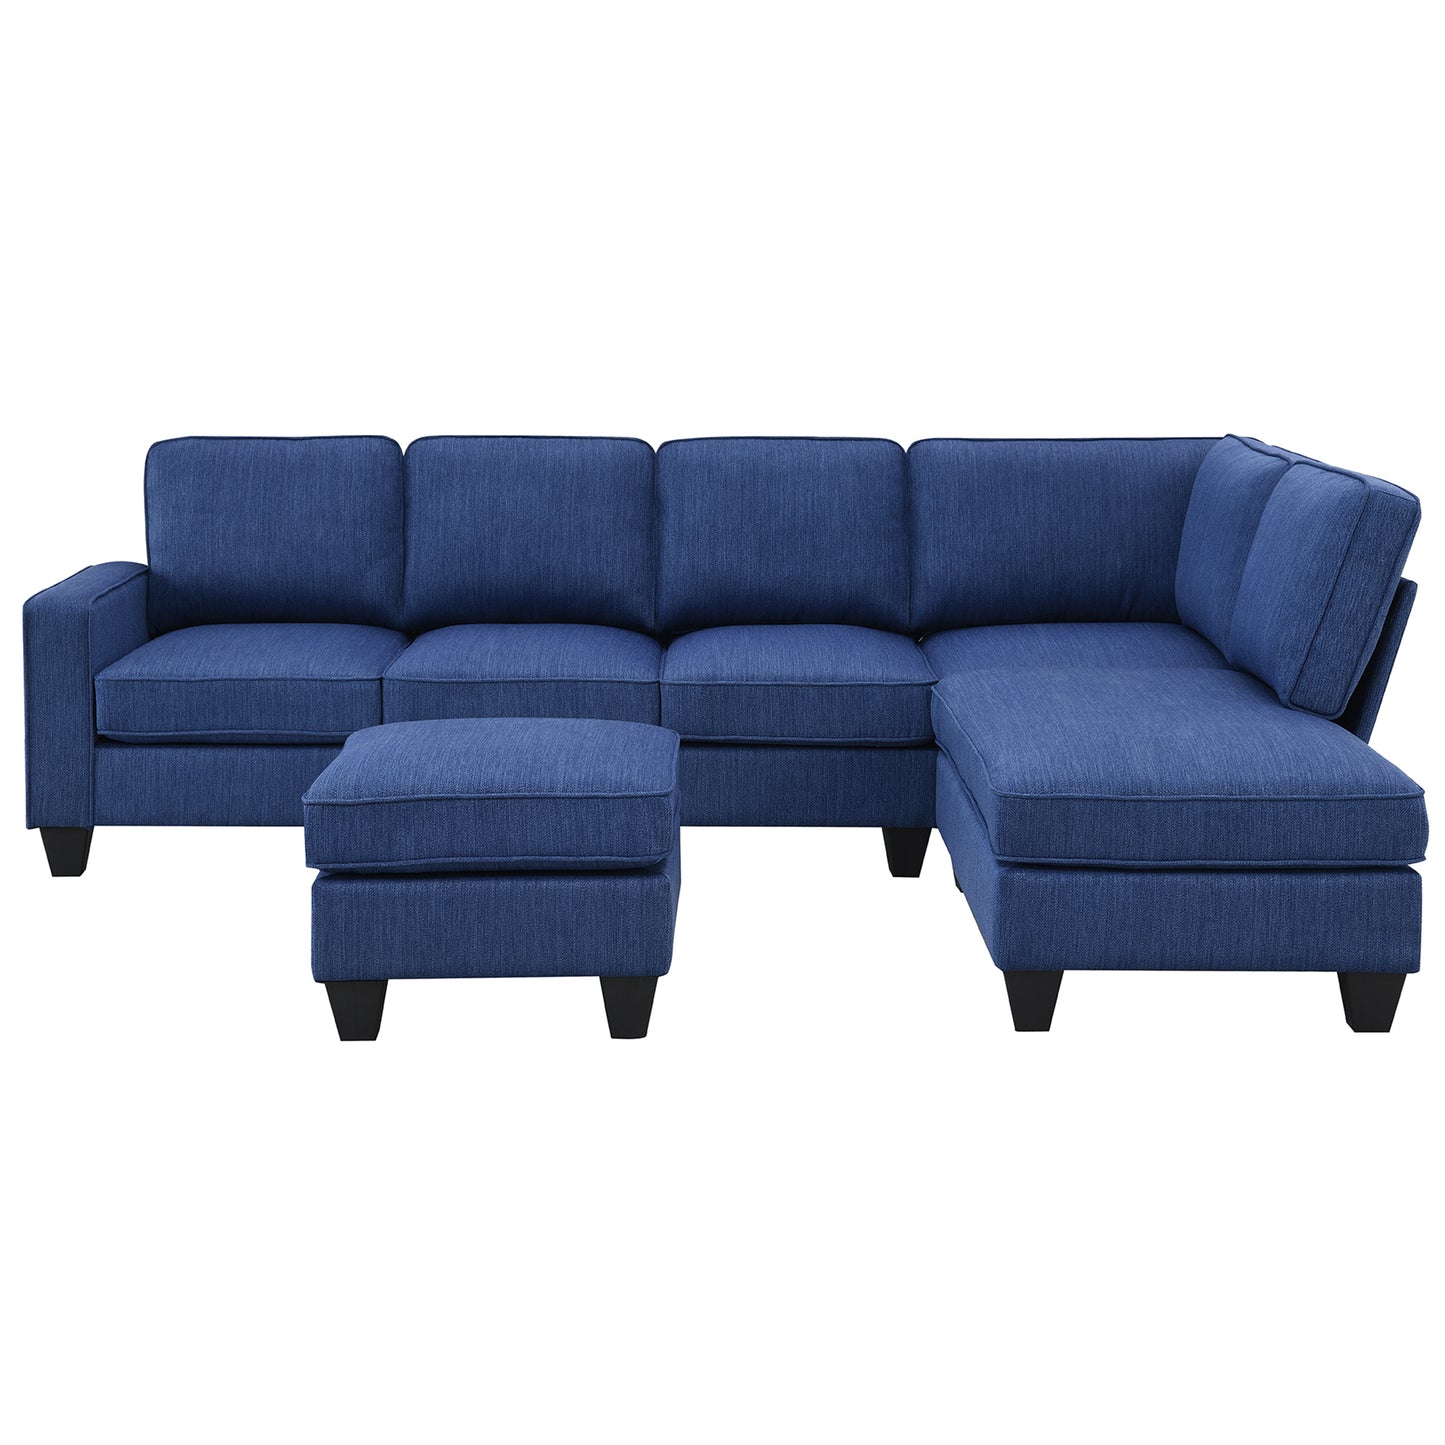 Modern L-Shaped Sectional Sofa with Convertible Ottoman and Chaise Lounge